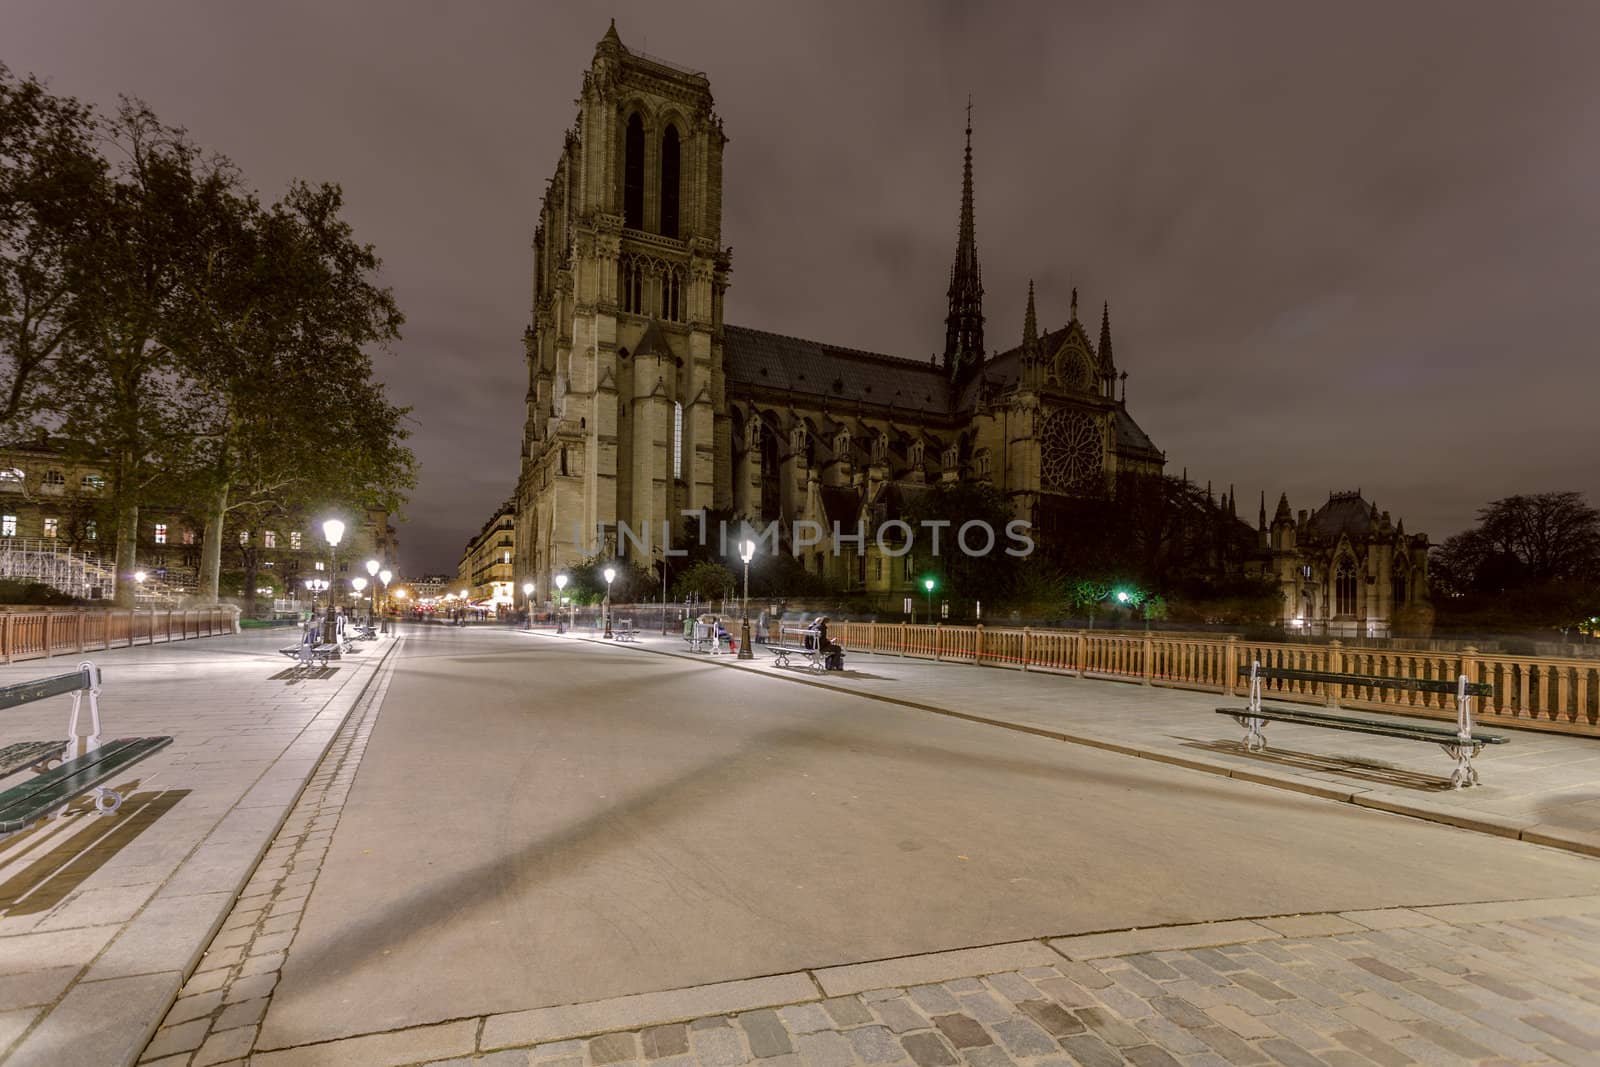 The famous Notre Dame at night in Paris, France